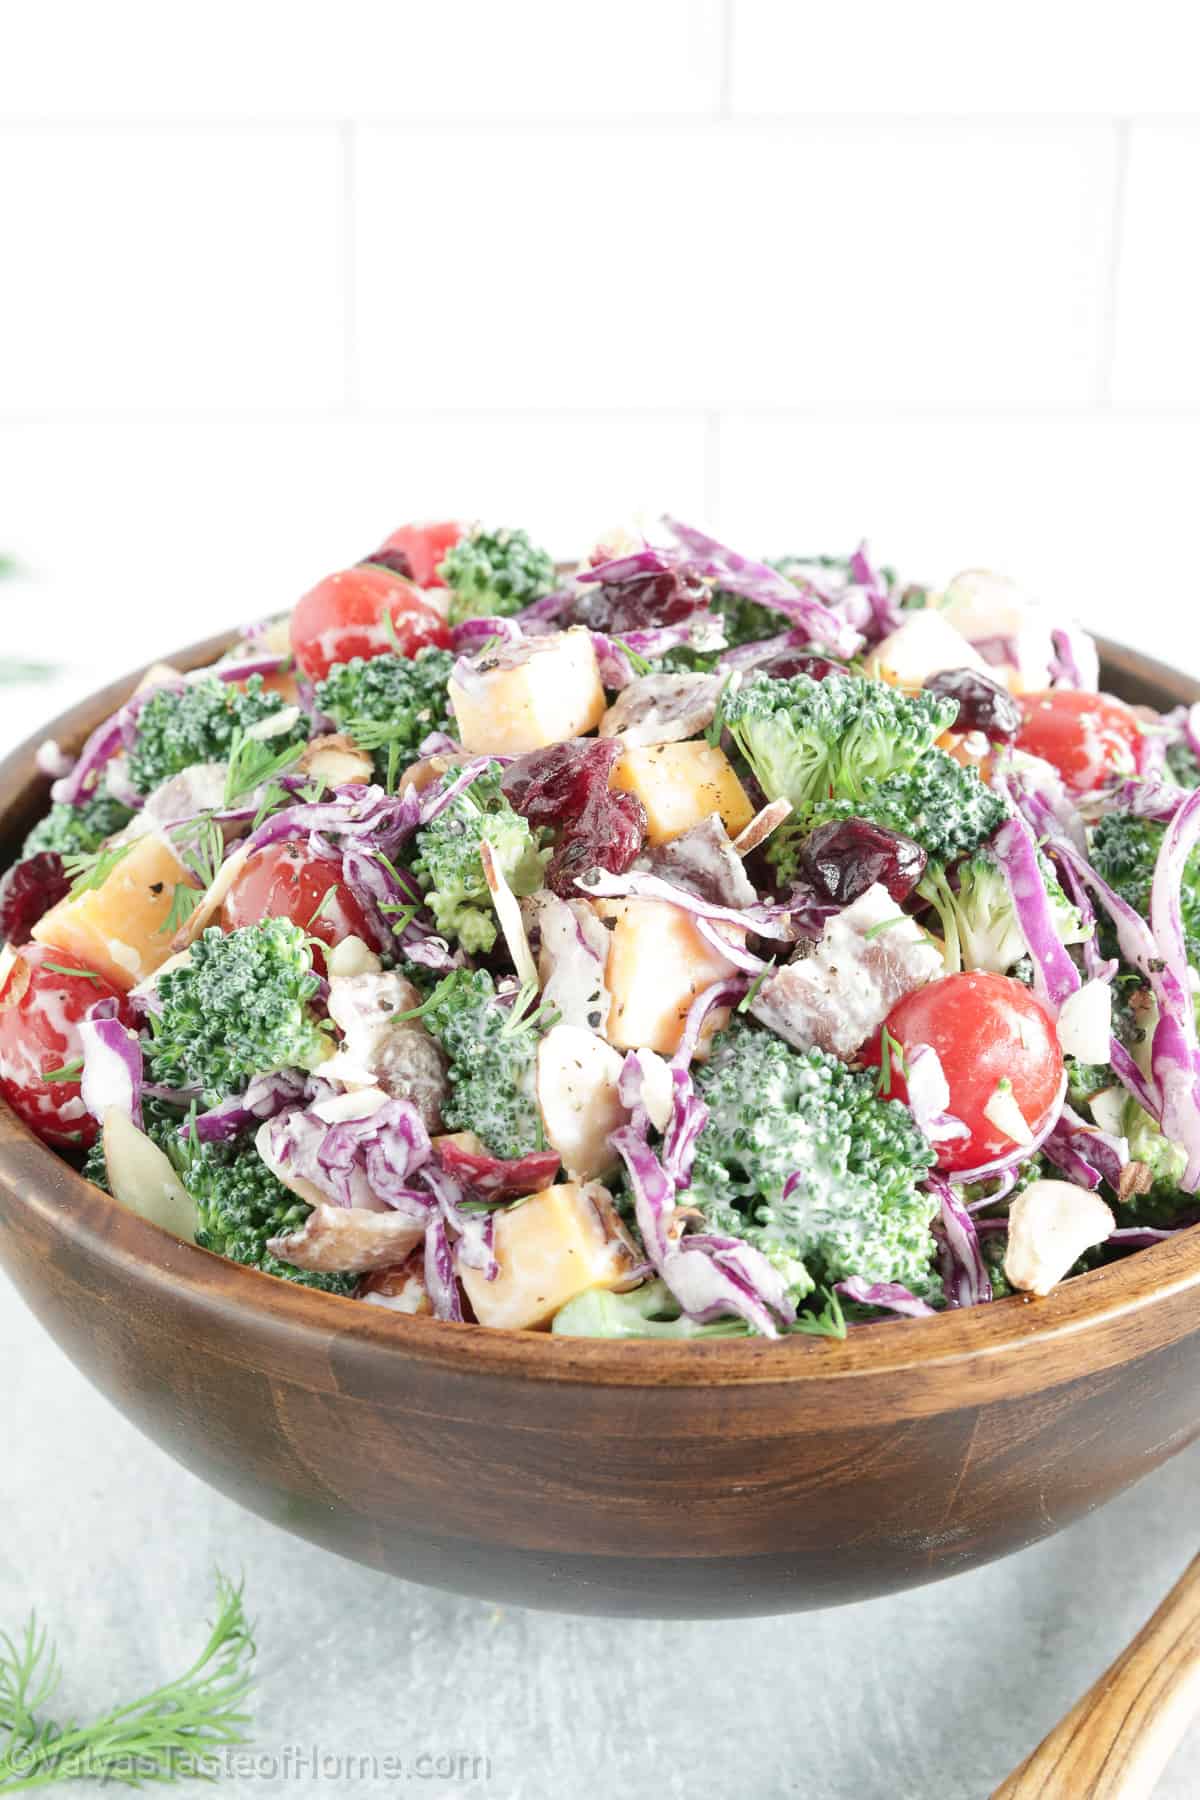 This Broccoli Tomato Salad is the perfect mix of veggies with a creamy mix of homemade dressing for the tastiest side dish salad you've ever had!